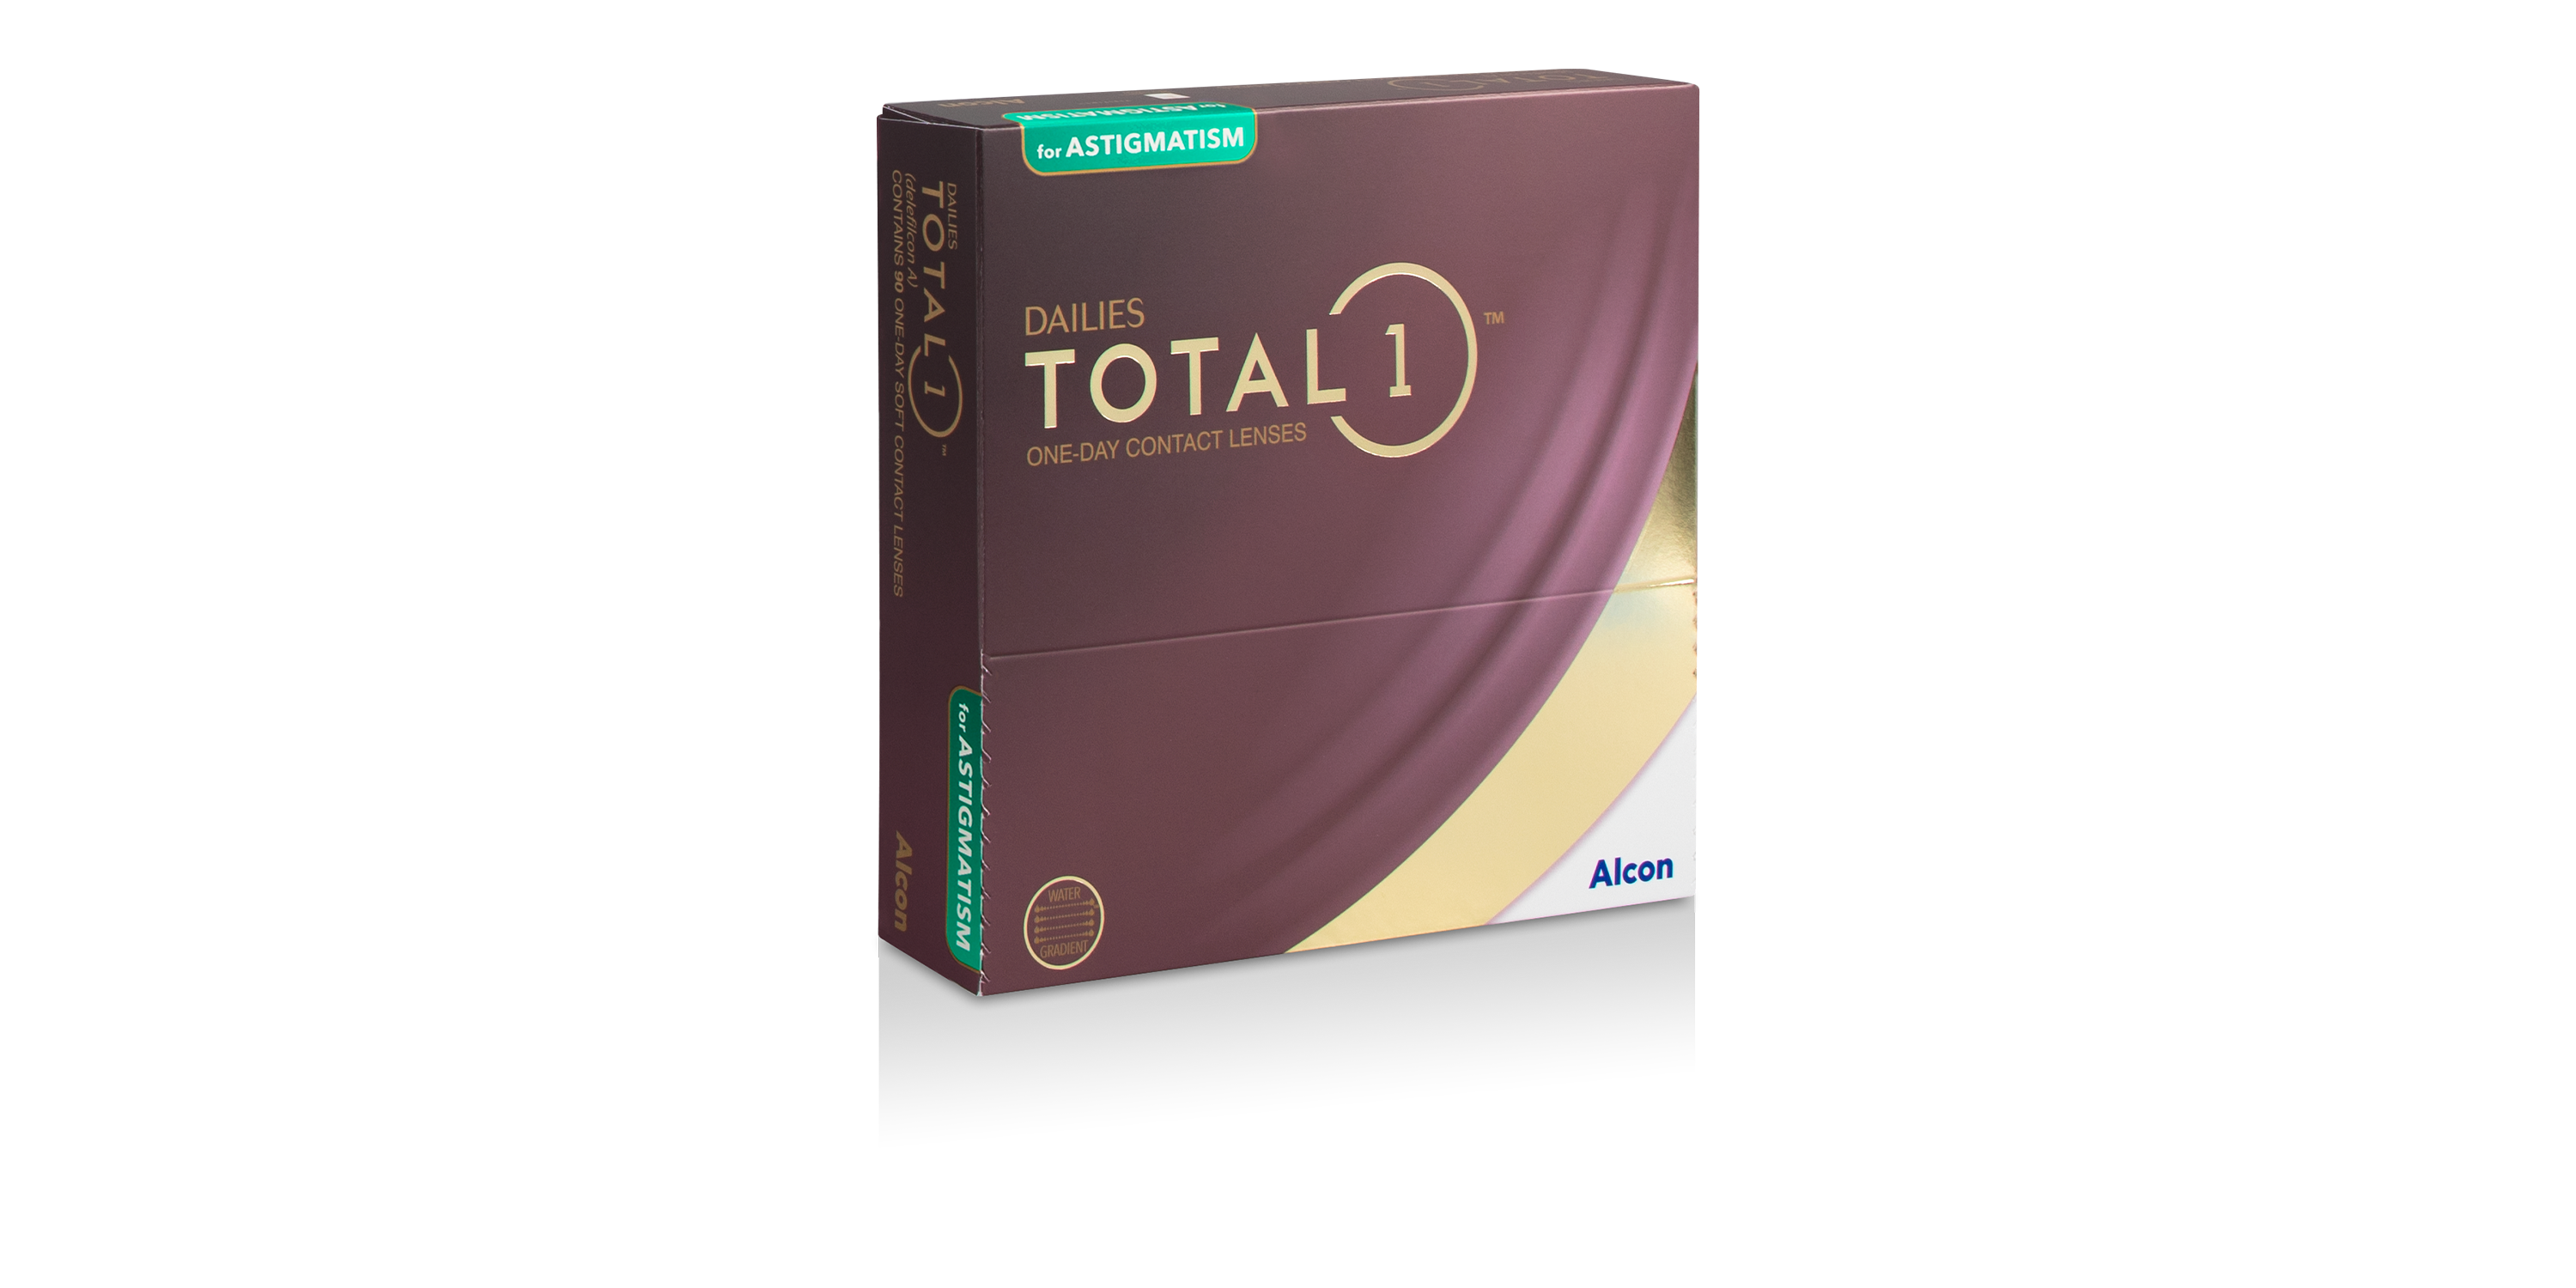 DAILIES TOTAL1® for Astigmatism, 90 Pack